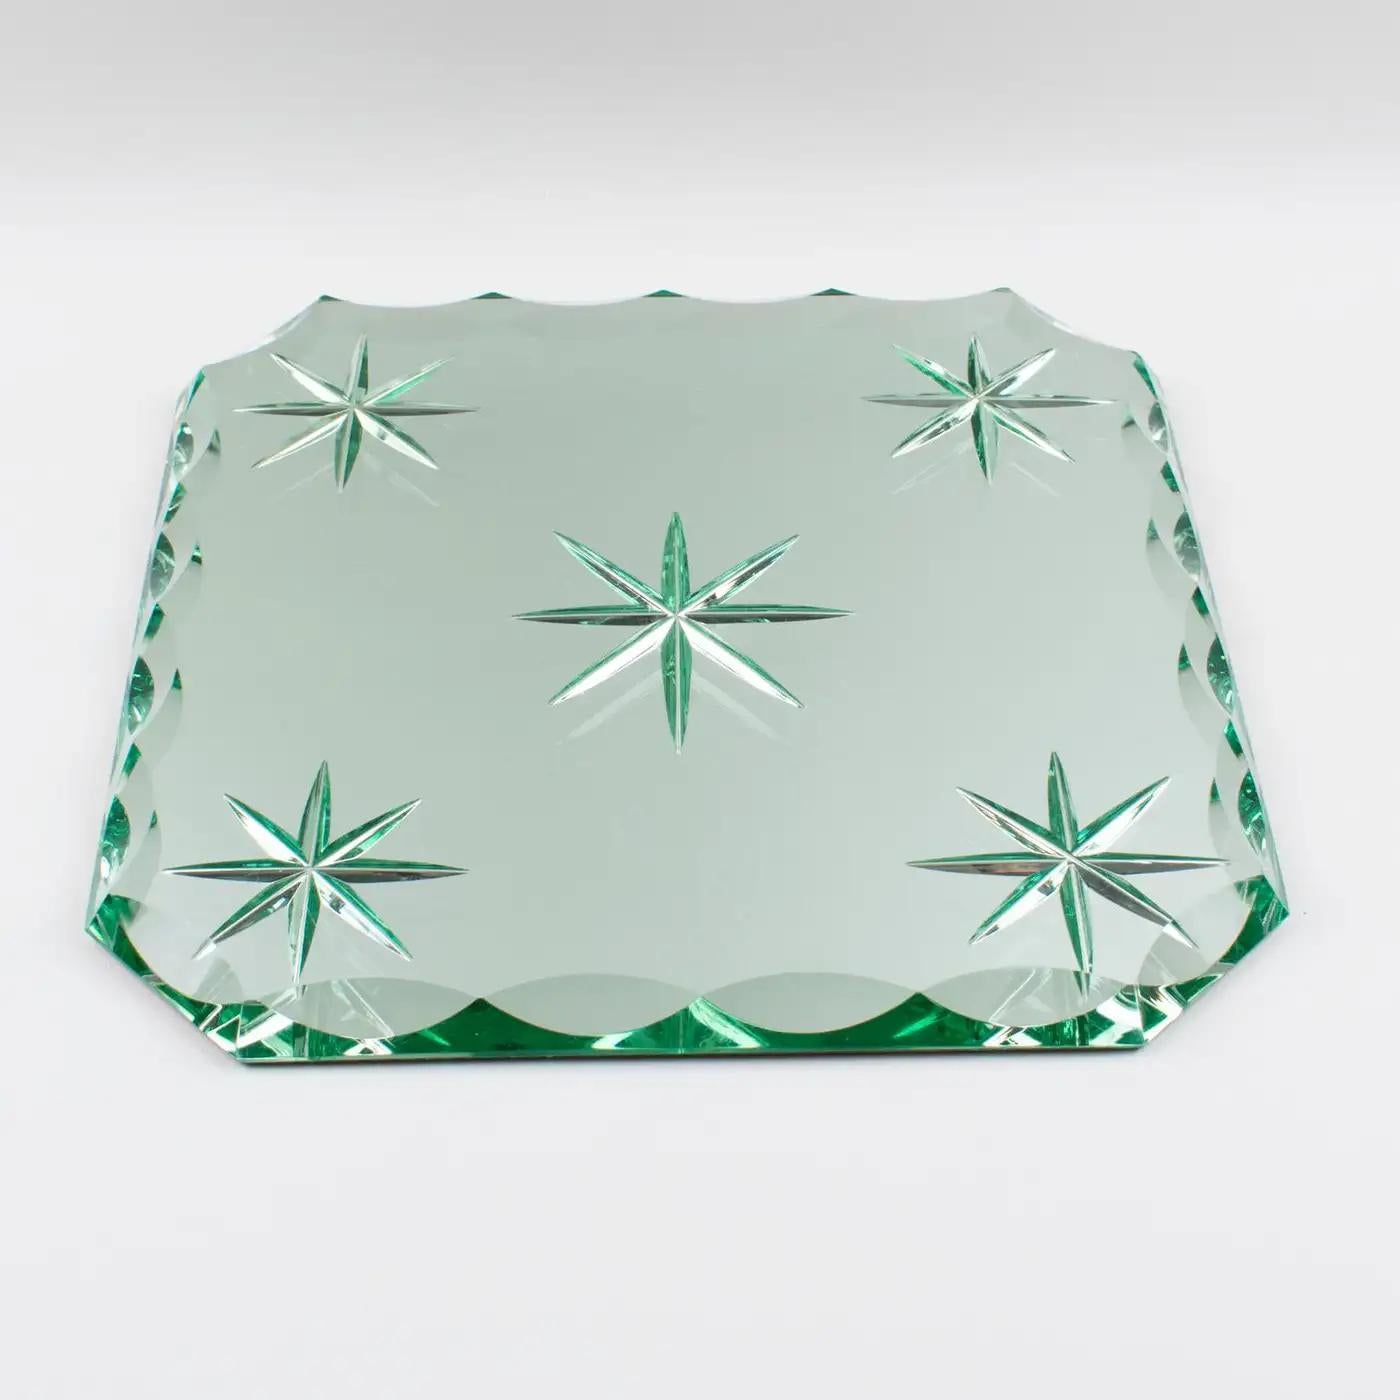 French designer Jean Luce (1895 - 1964) created this lovely Art Deco mirrored tray, centerpiece, or platter. The extra thick mirror glass slab has a square shape with a reverse carved star etched motif in the center, and the four angles and cut